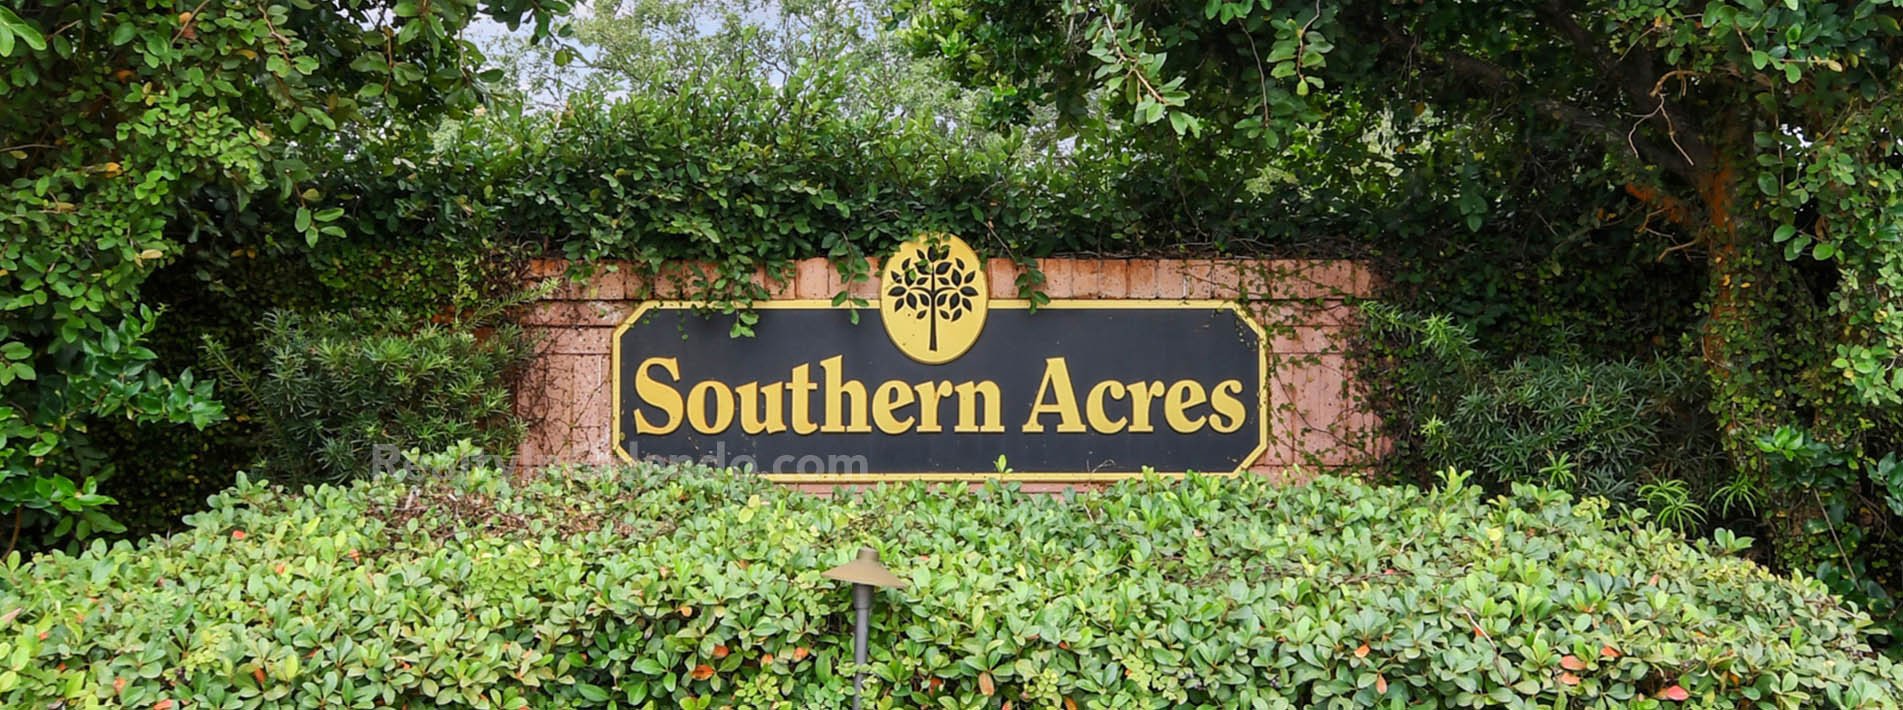 Southern Acres Windermere